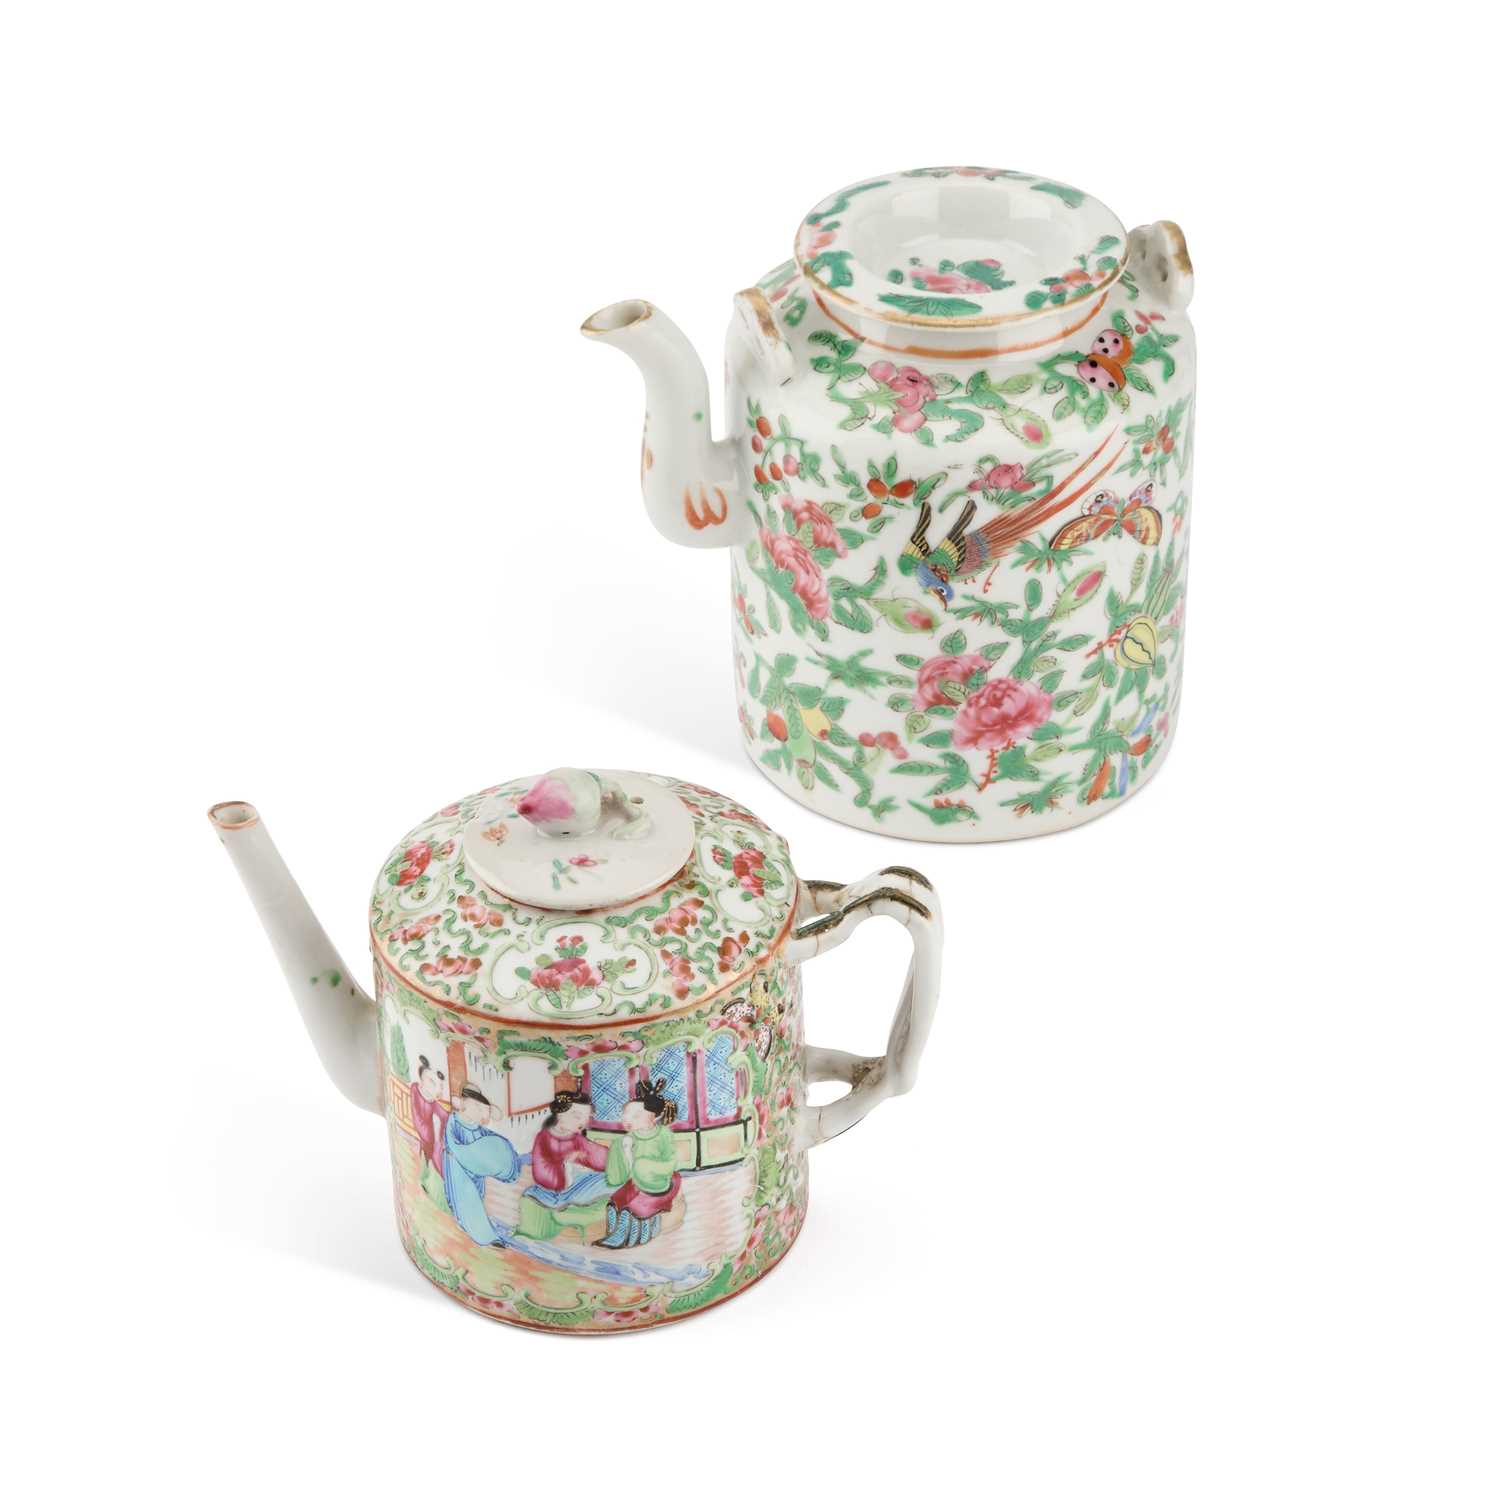 TWO CHINESE FAMILLE ROSE TEAPOTS